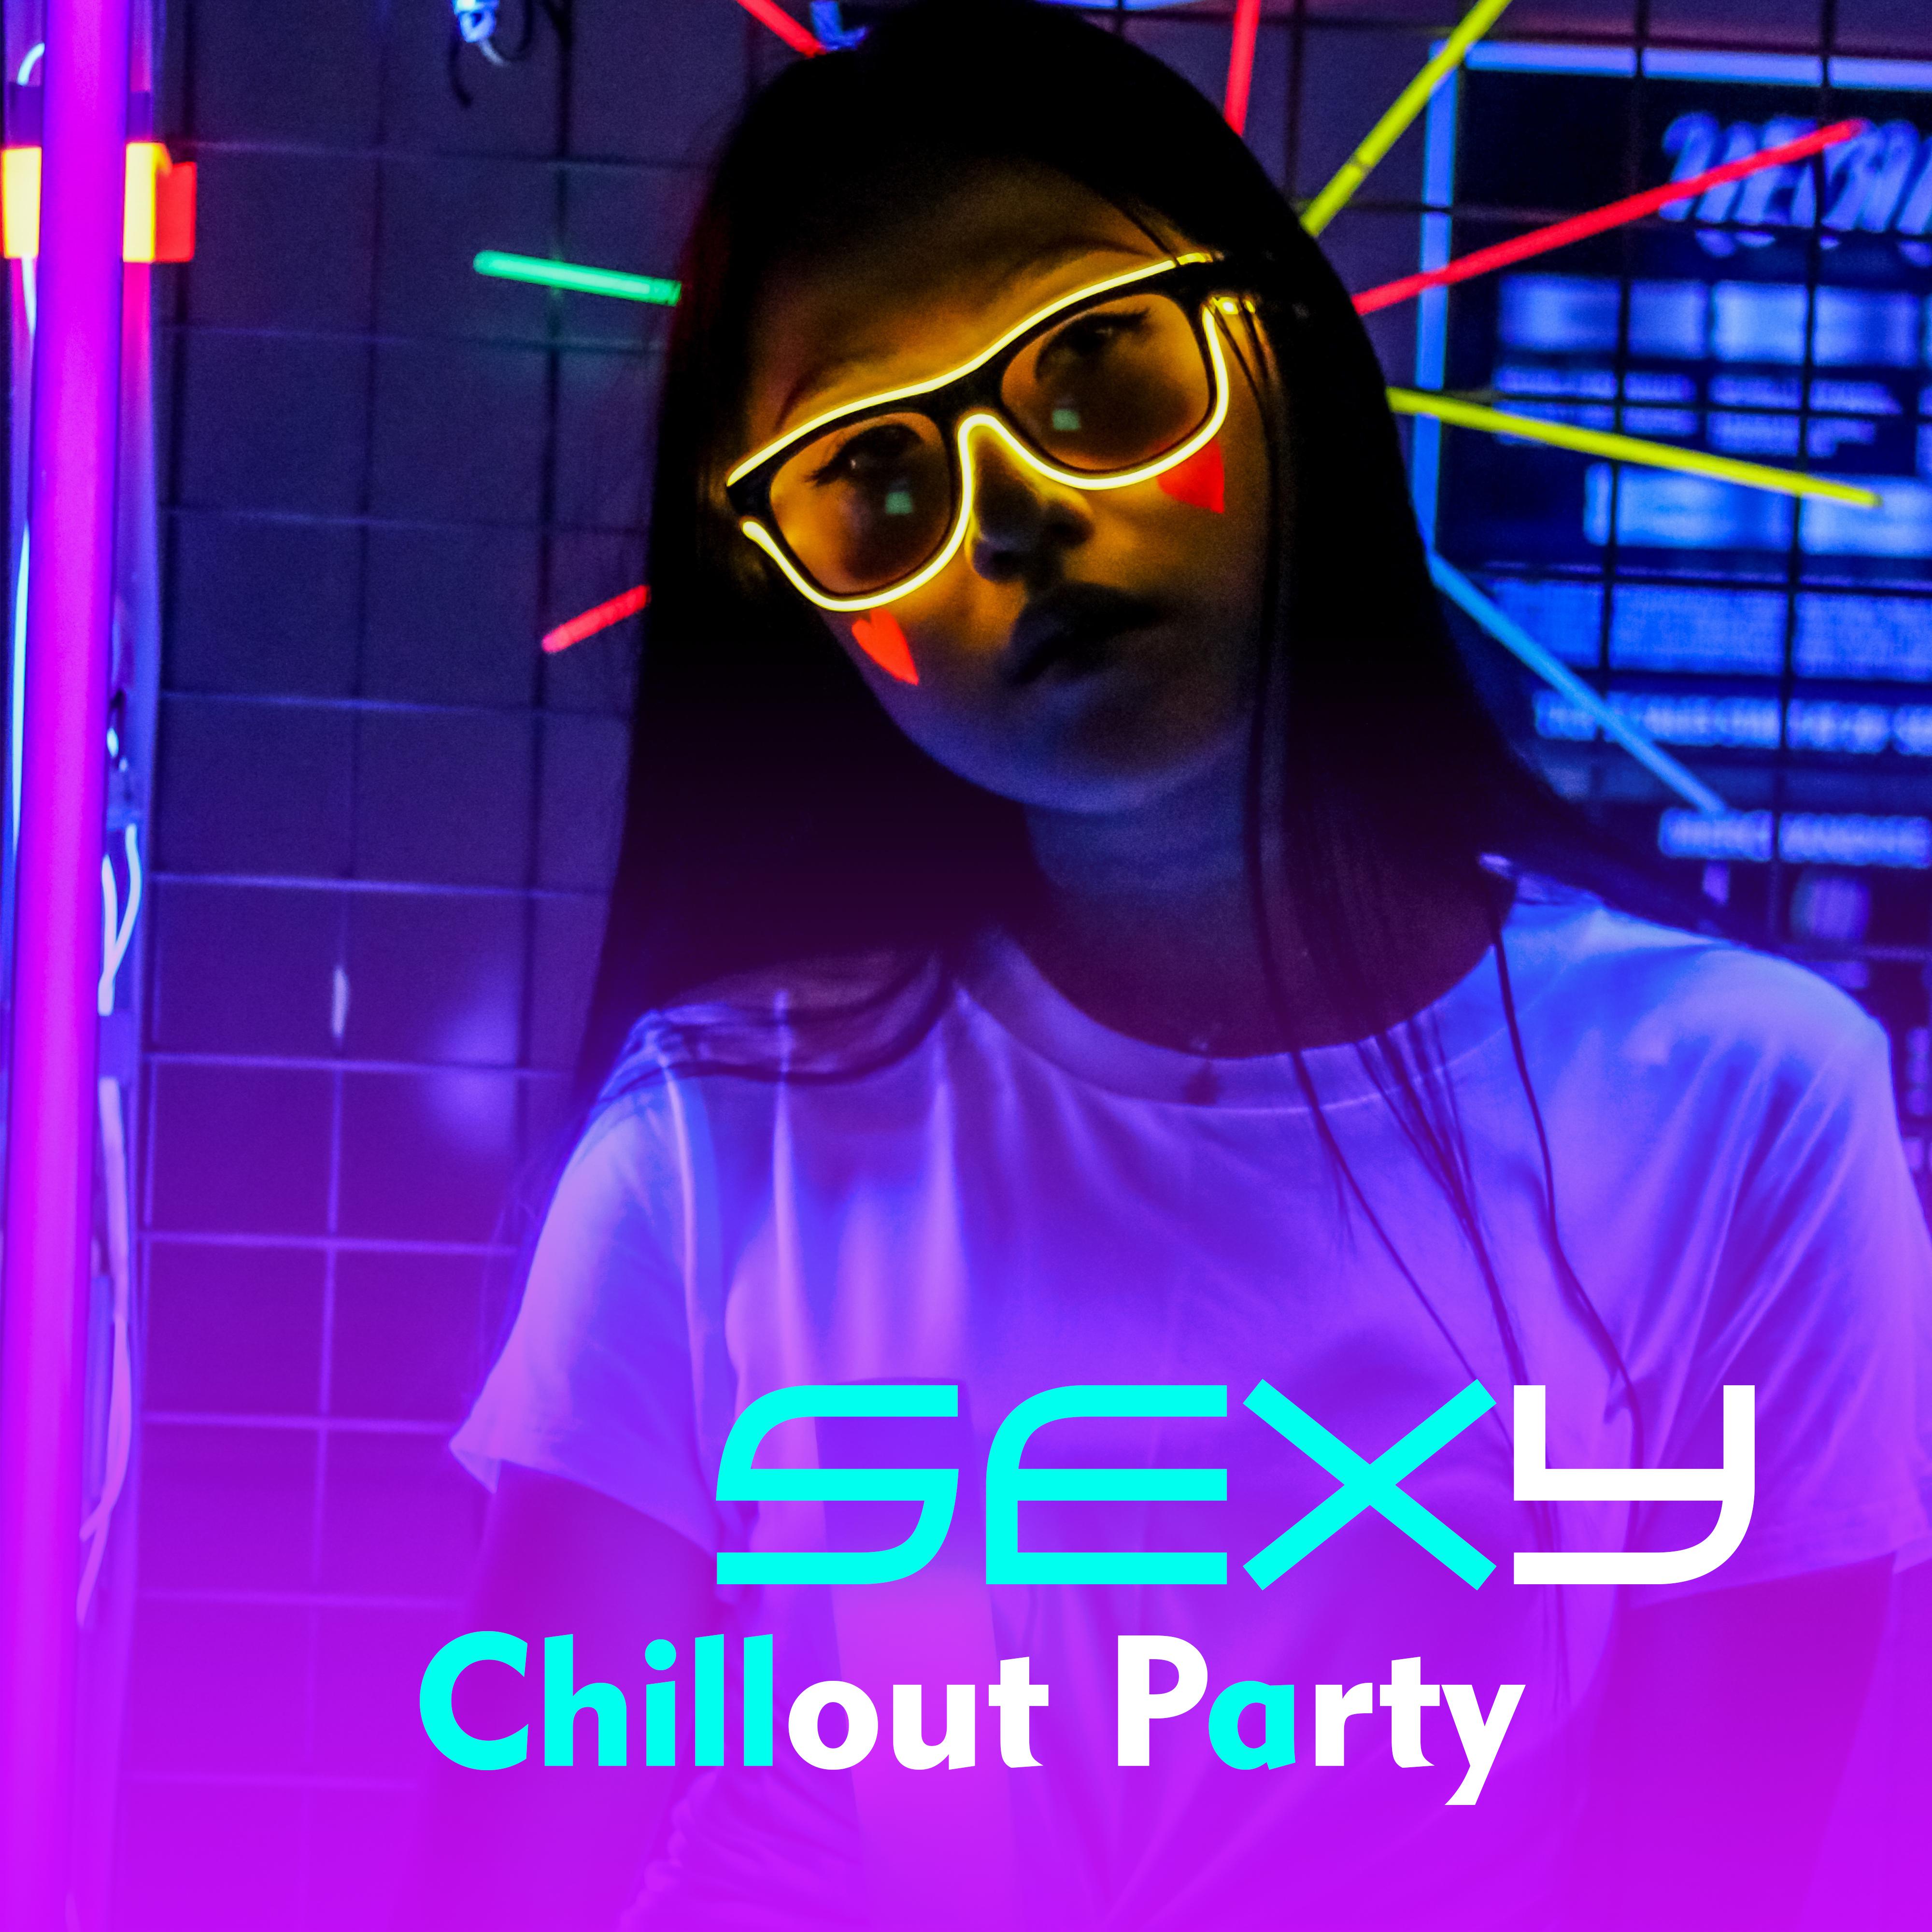 **** Chillout Party